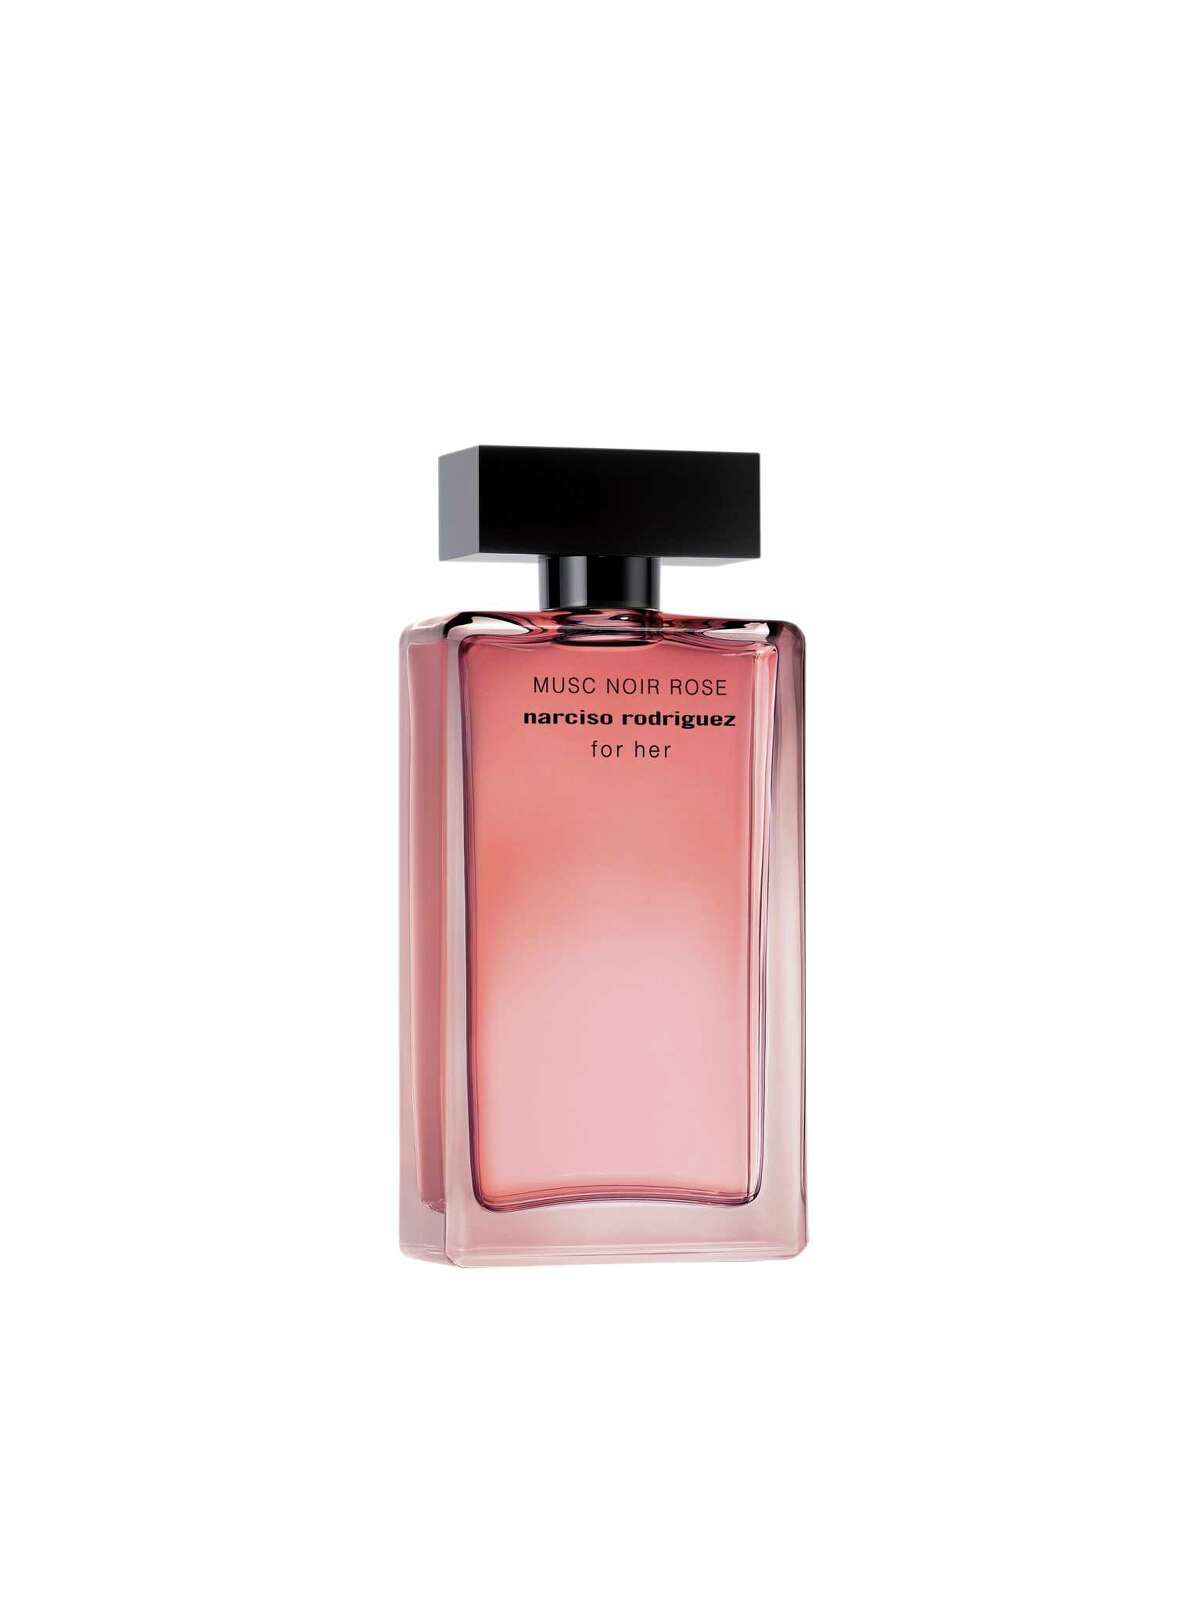 The new Musc Noir Rose by Narciso Rodriguez offers intense tuberose blended with plum, pink pepper, tangy citrus and herbal and balsamic notes.